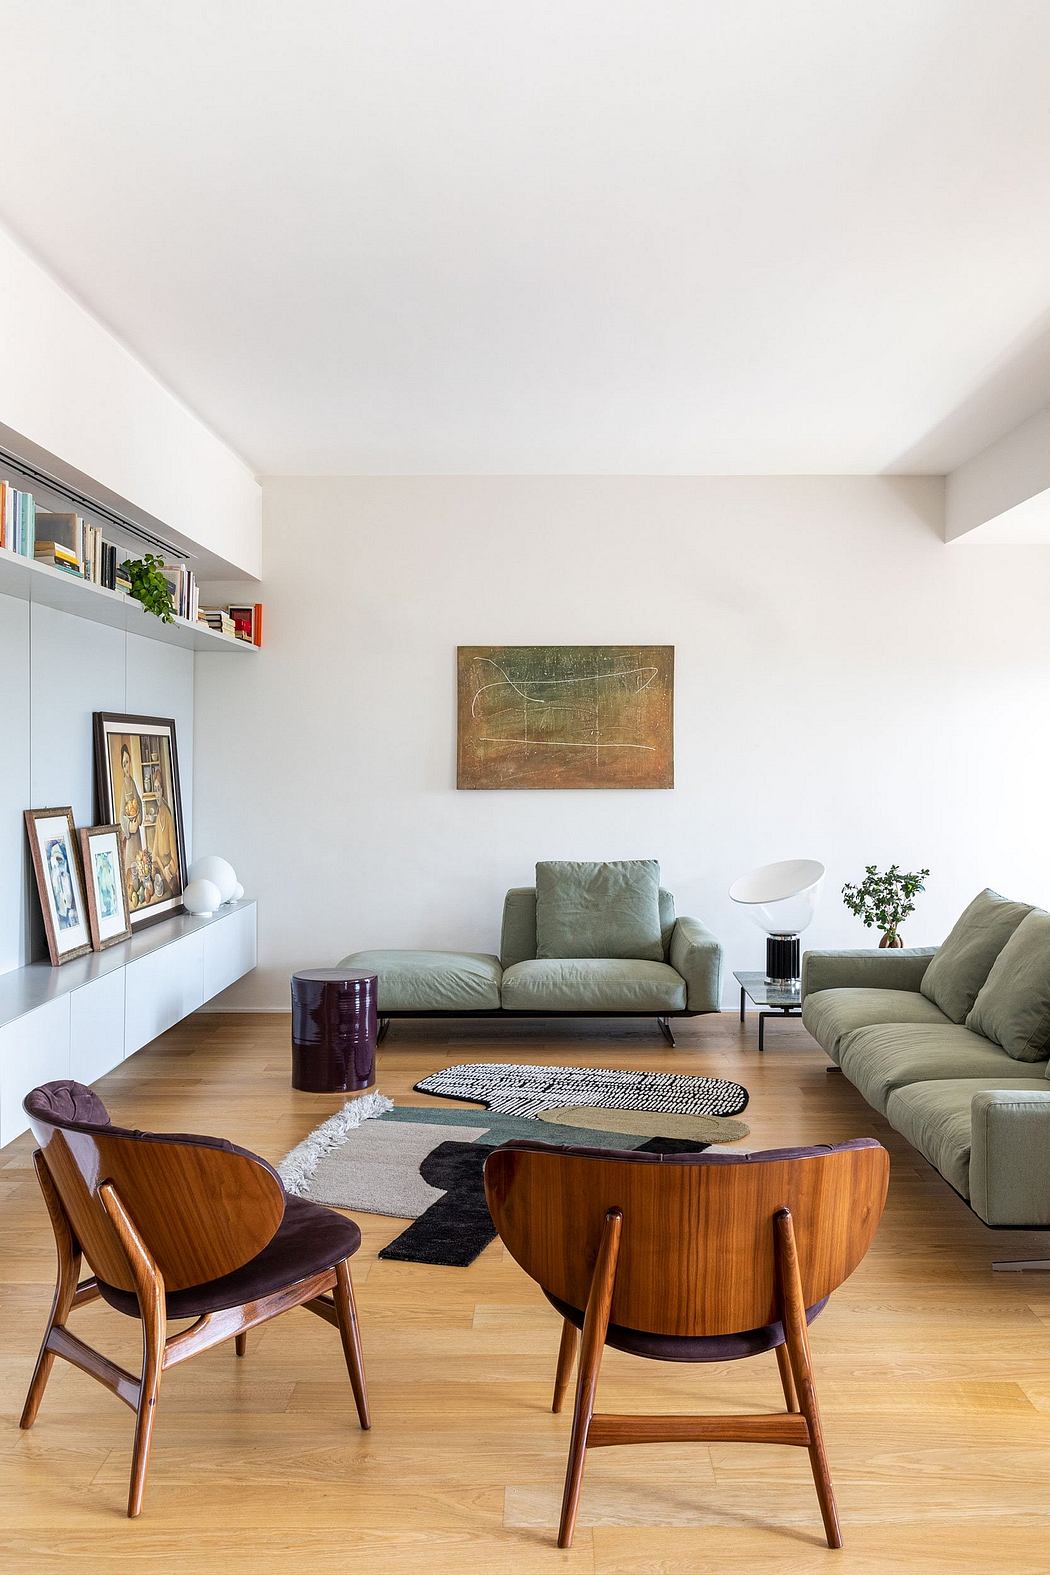 Minimalist living room with clean lines, plush green sofa, and mid-century wooden furniture.